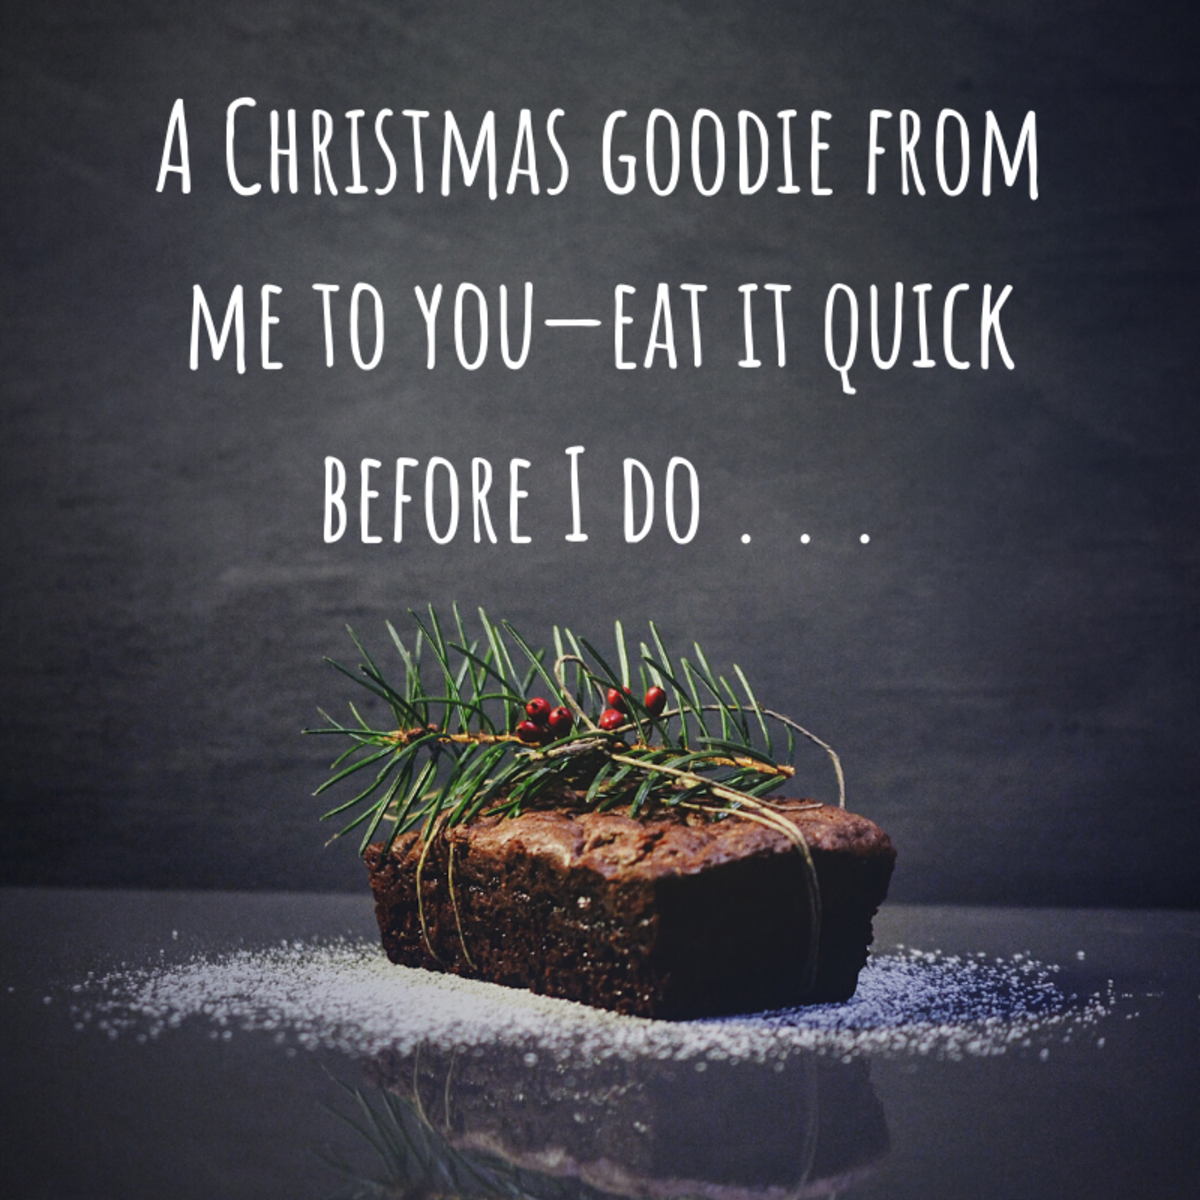 This little phrase is perfect for including in a small card with a delicious baked good. 